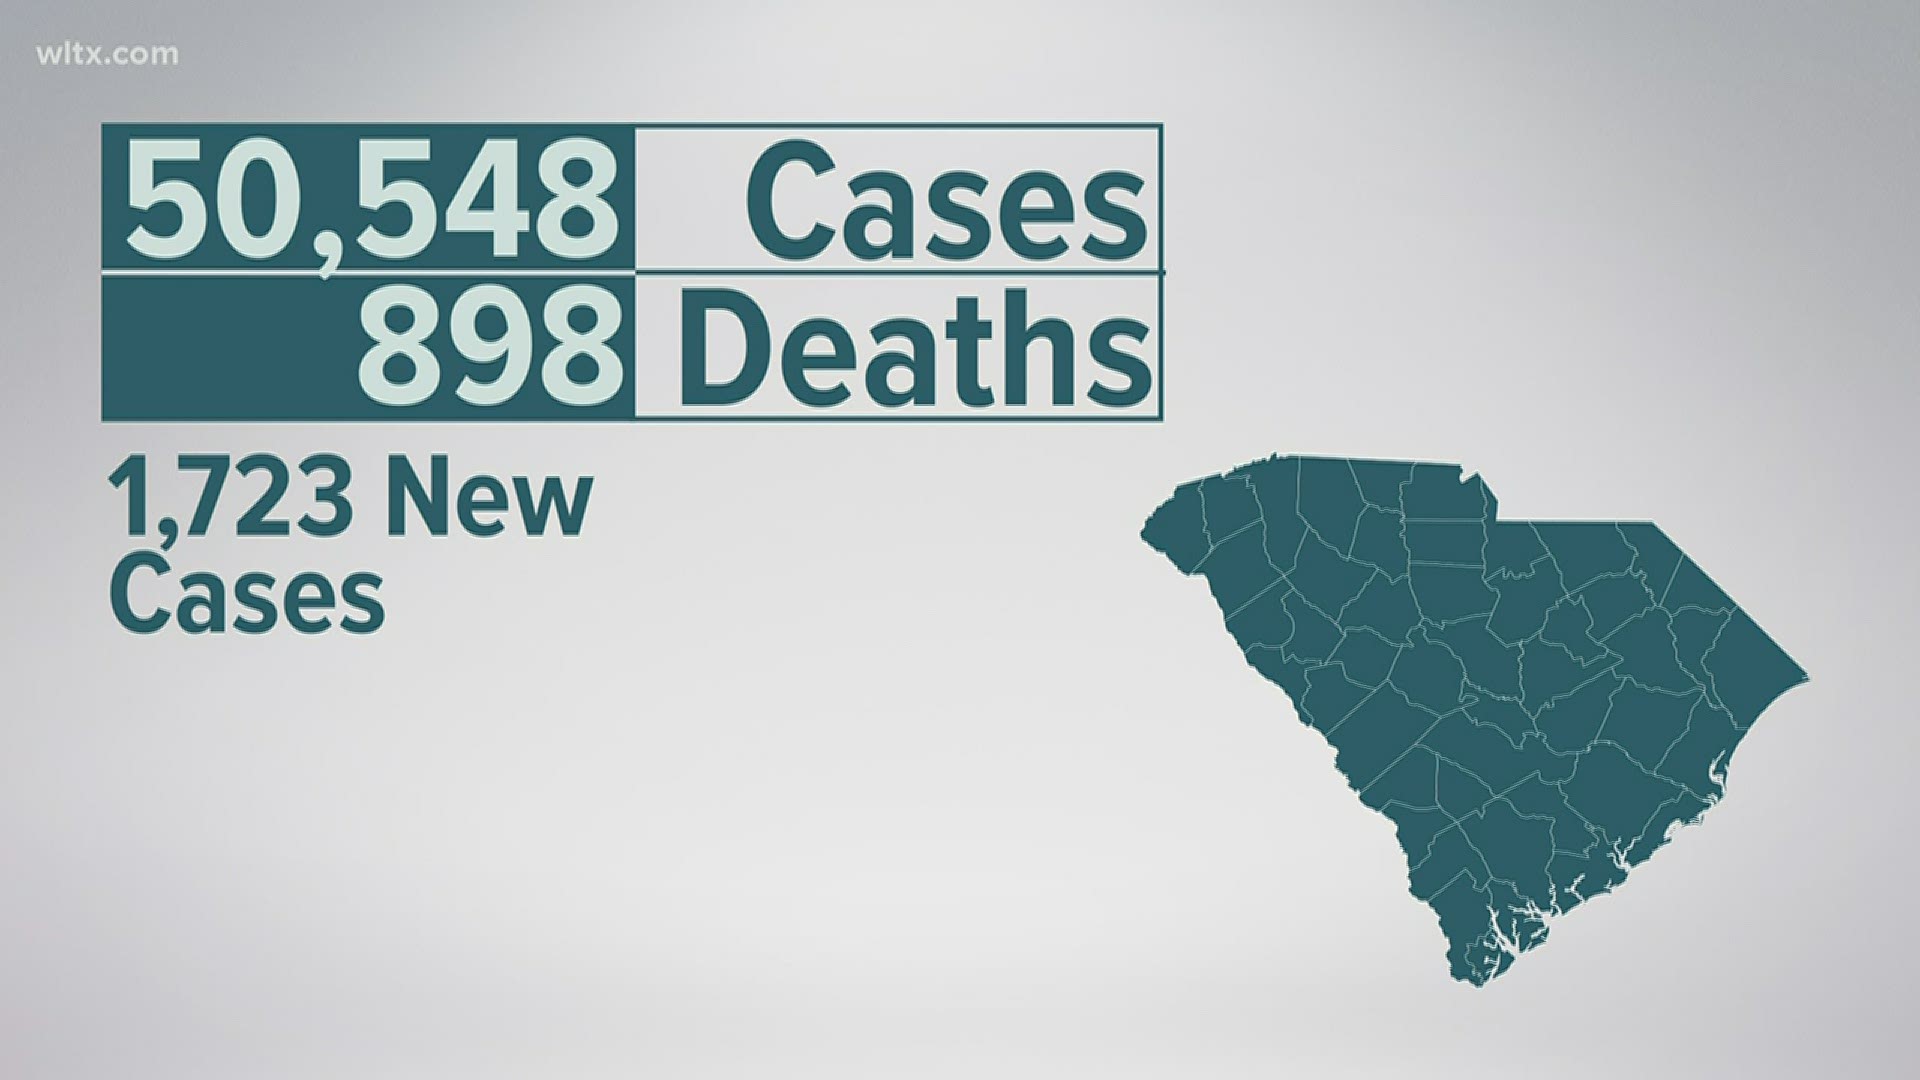 s brings the total number of confirmed cases to 50,548, probable cases to 143, confirmed deaths to 897 and 7 probable deaths